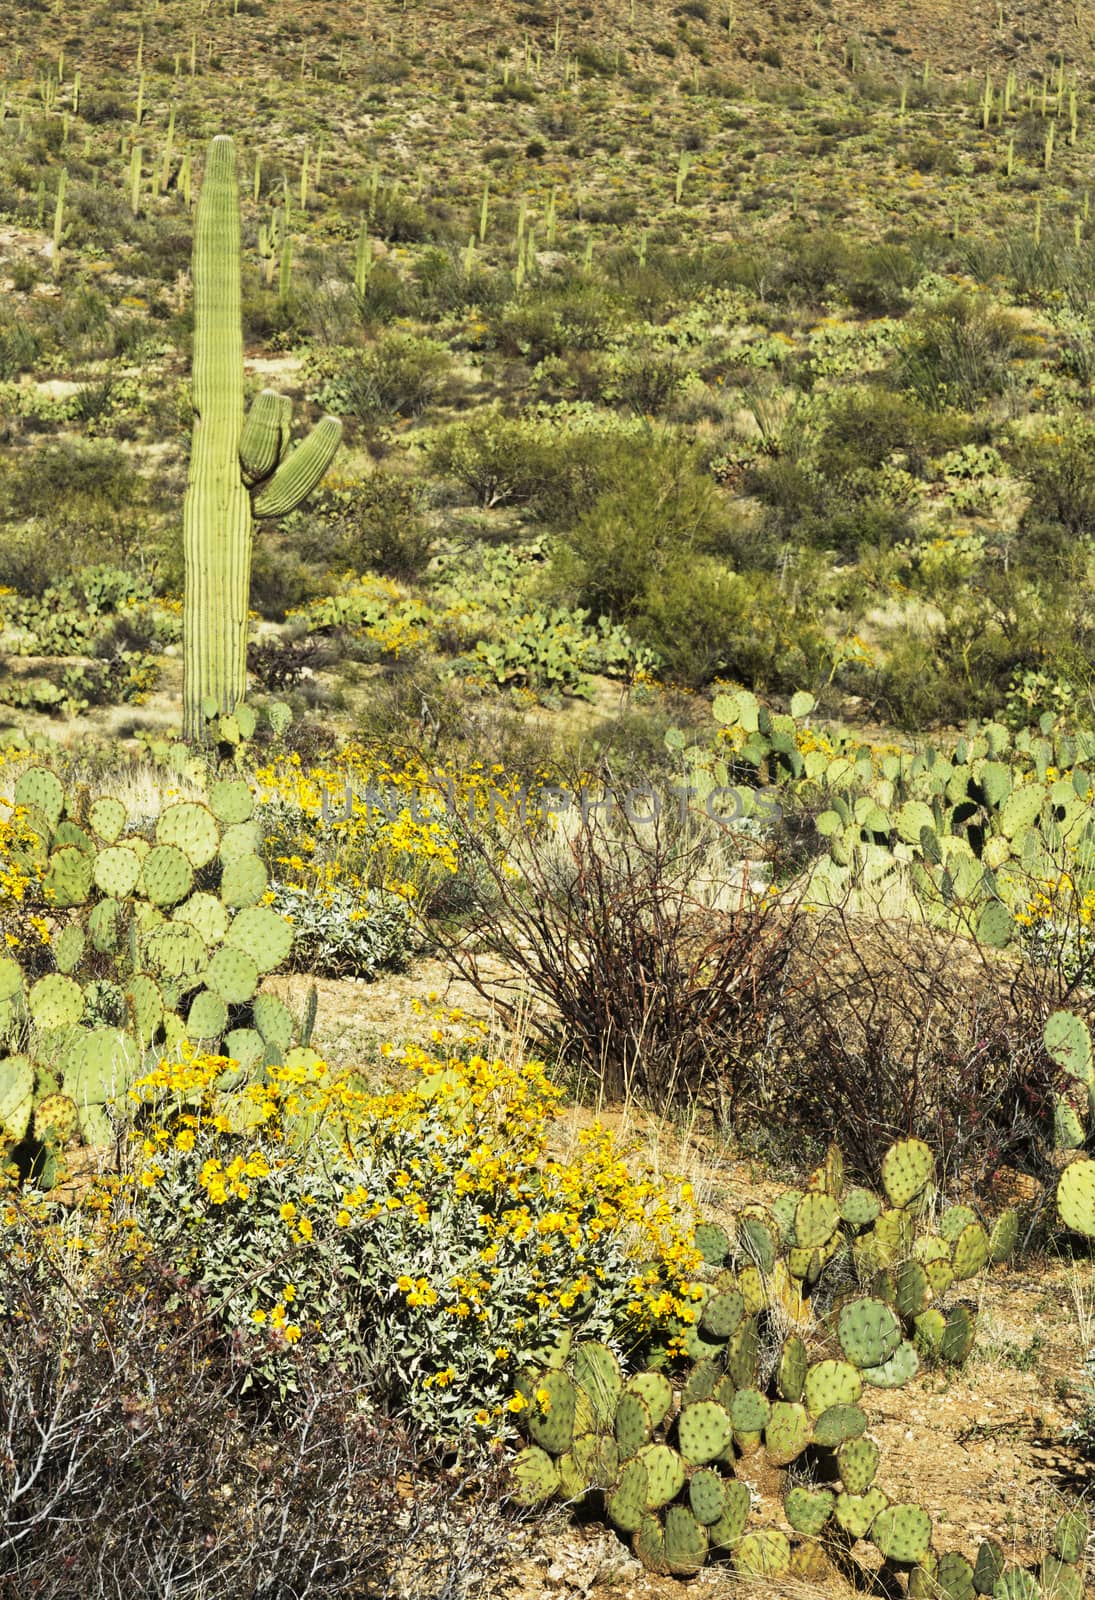 Typical spring view of of yellow brittlebush, prickly pear cactus, and saguaro cactus on Sonoran Desert slope in East Division of Saguaro National Park.